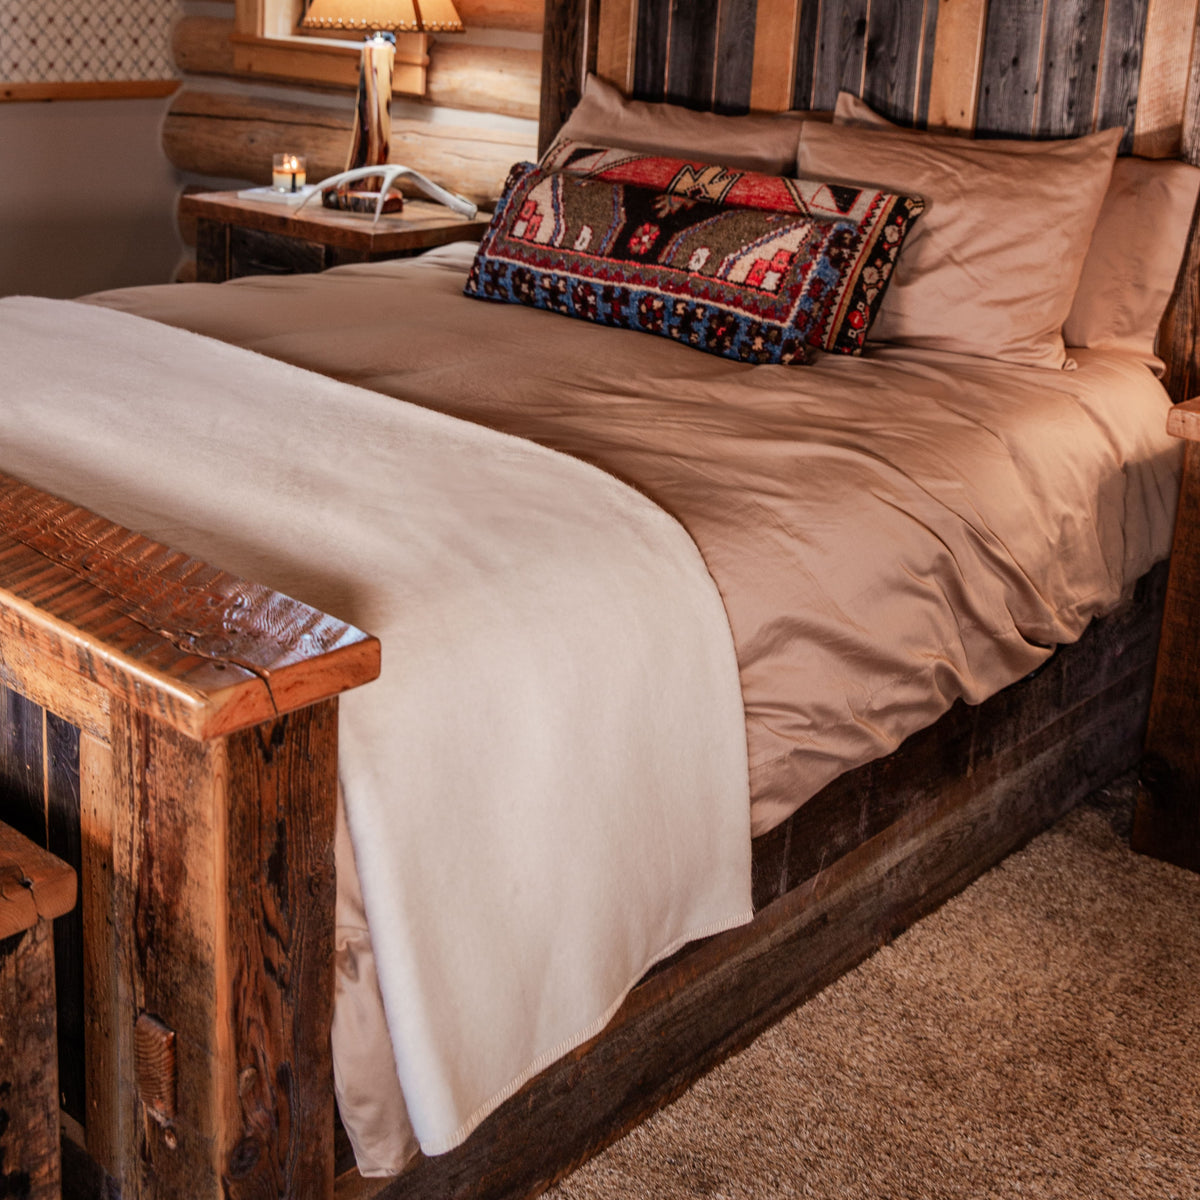 A cabin bedroom with a lamp and wooden bedframe. On the bed are several decorative pillows and a natural white Alpacas of Montana warm cozy lightweight moisture wicking soft plush king and queen size blanket.